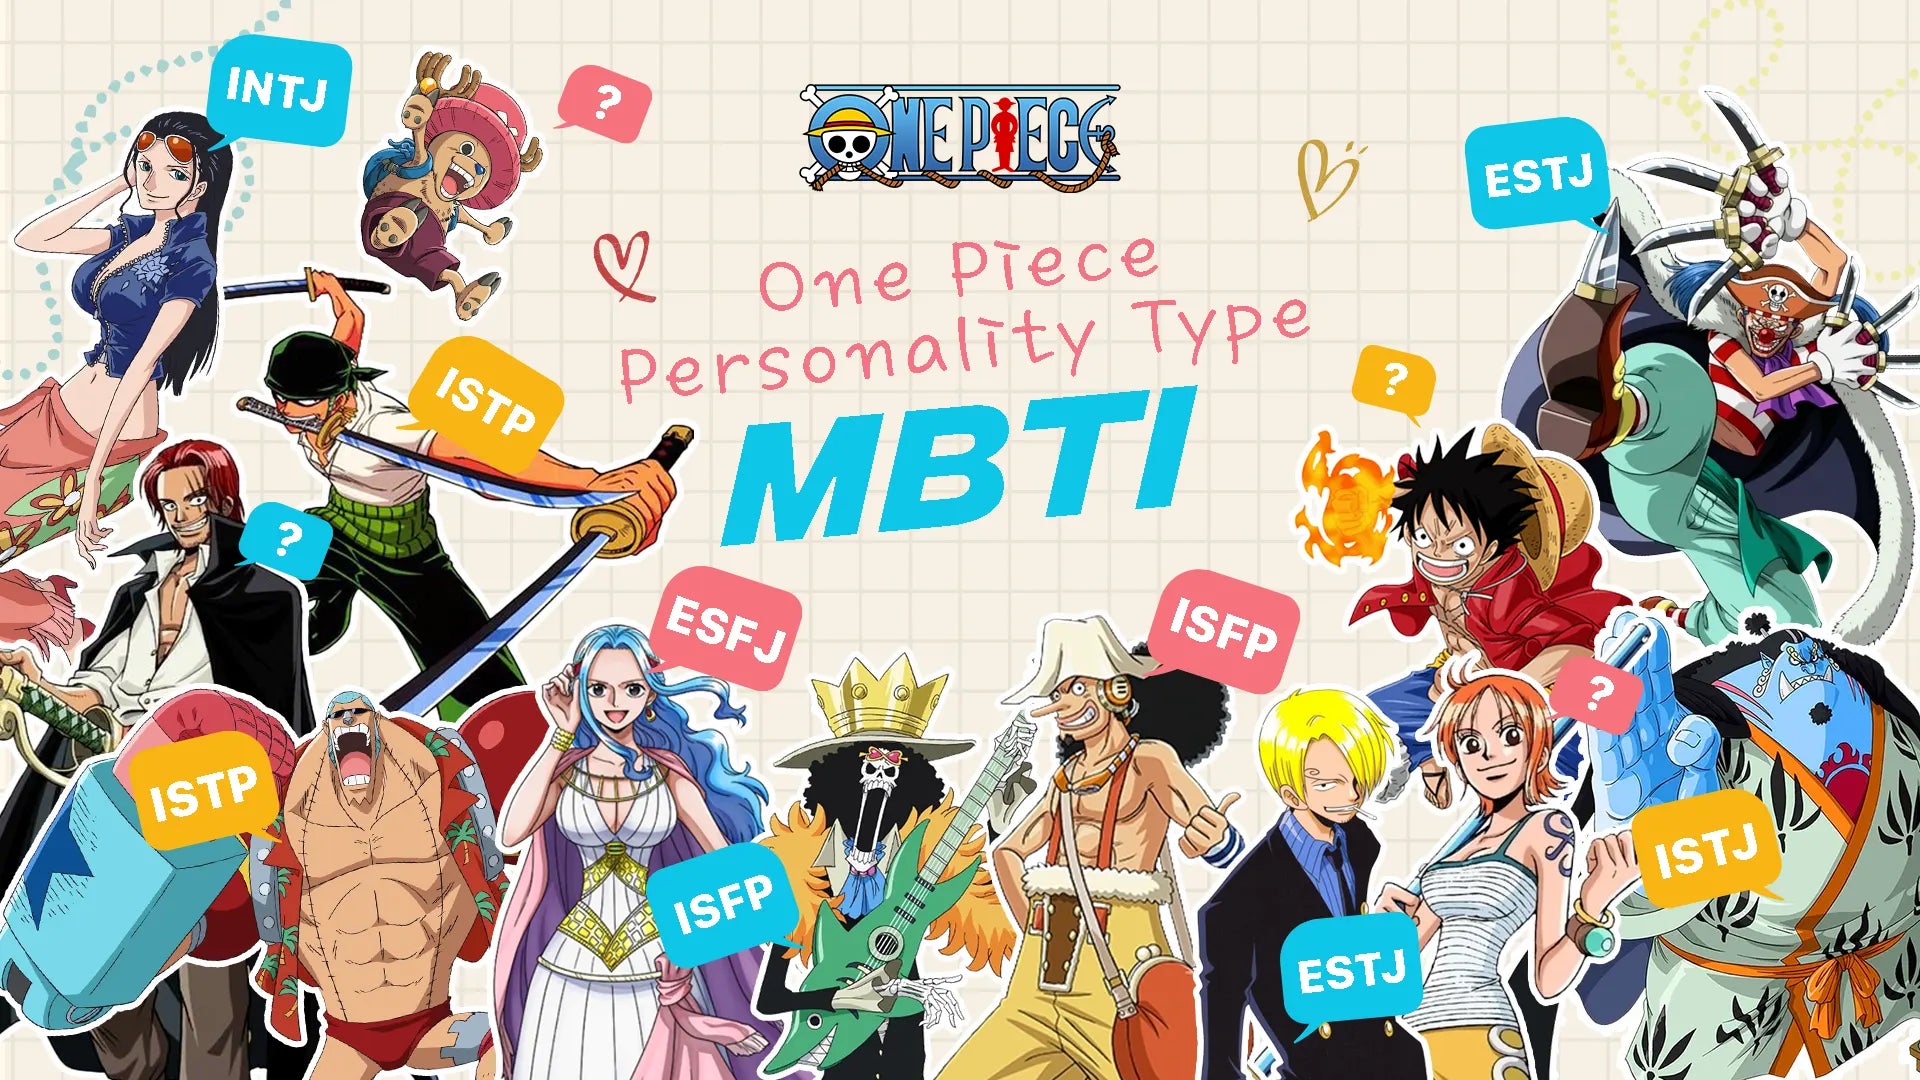 UPDATED One Piece MBTI Types - Netflix and Anime Personalities